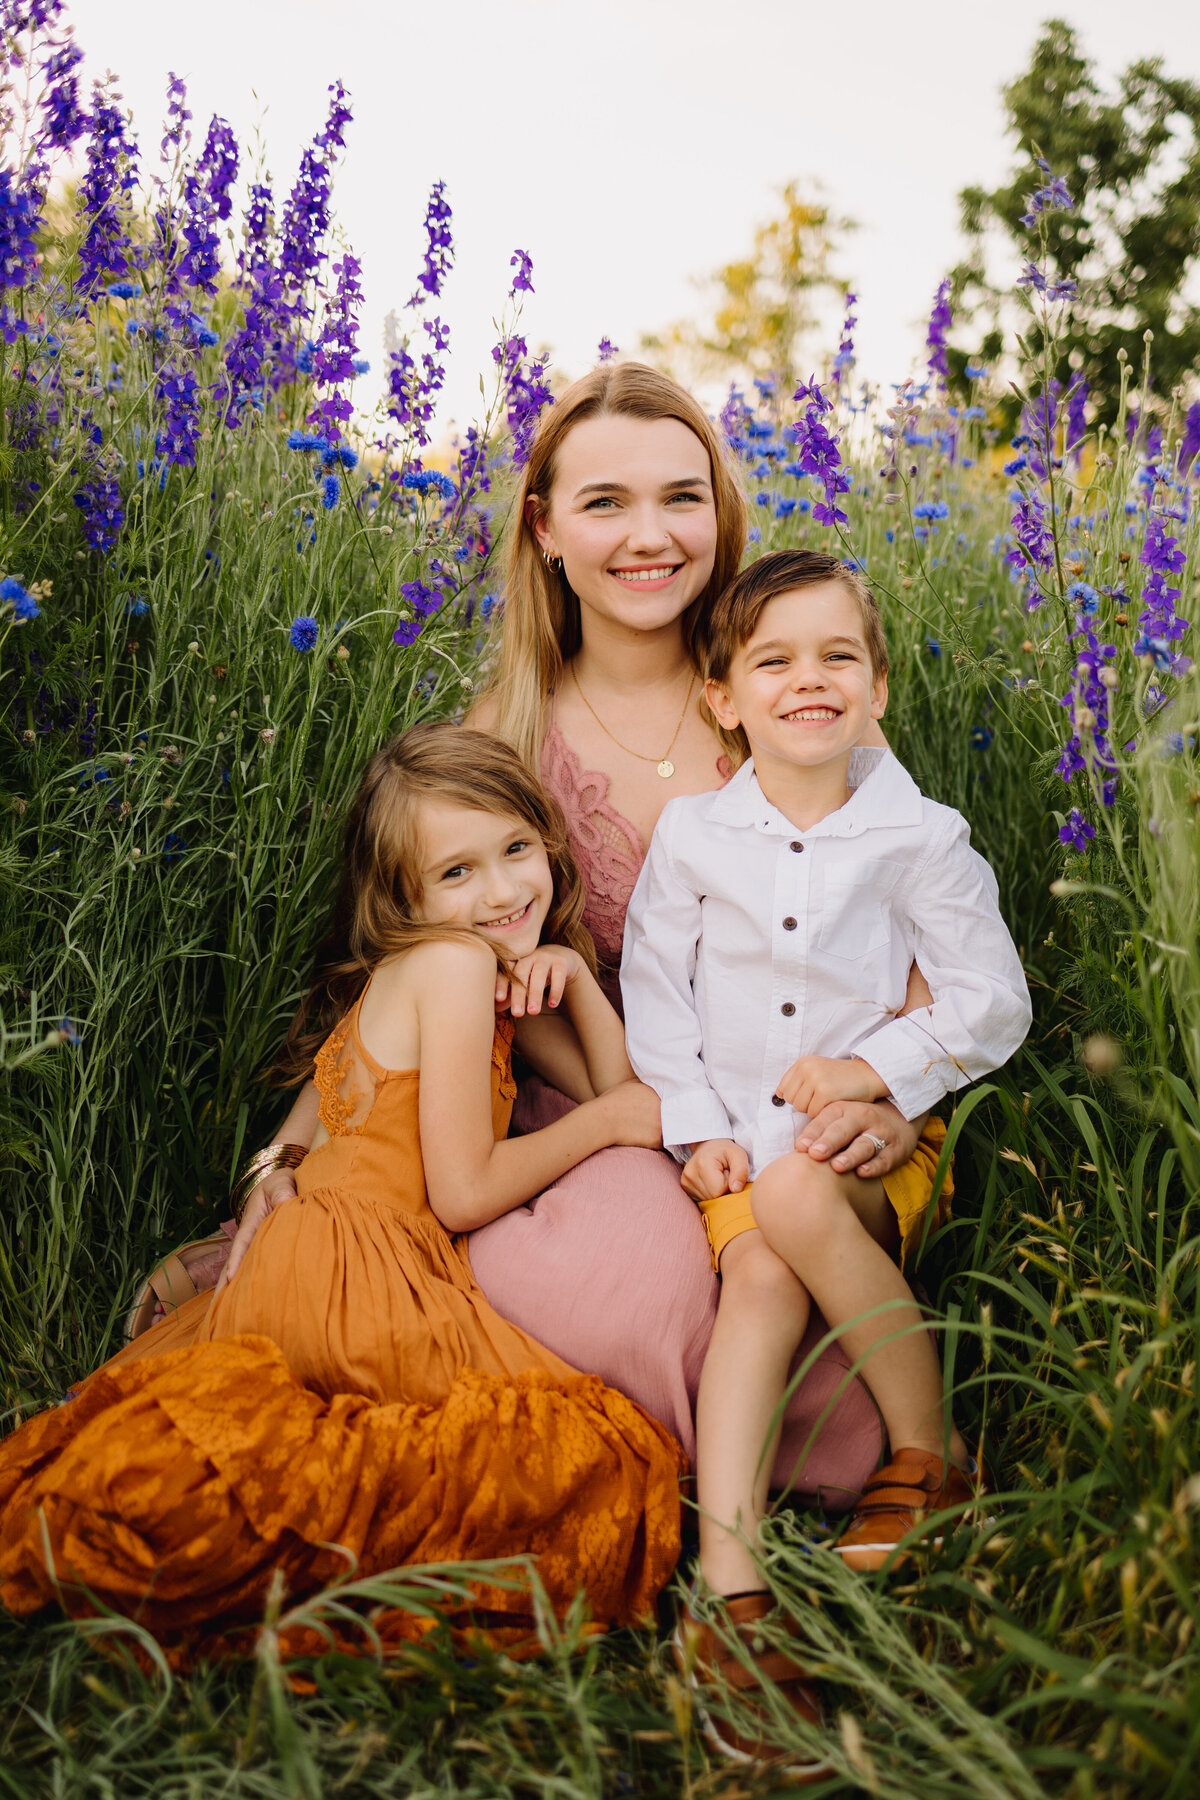 Three siblings are taking a mini photo session in spring season. They are sitting on the glass and around them are green zone  with purple flowers. The older sister is wearing a pink dress, the boy  a white shirt and the youngest girl a long orange dress.